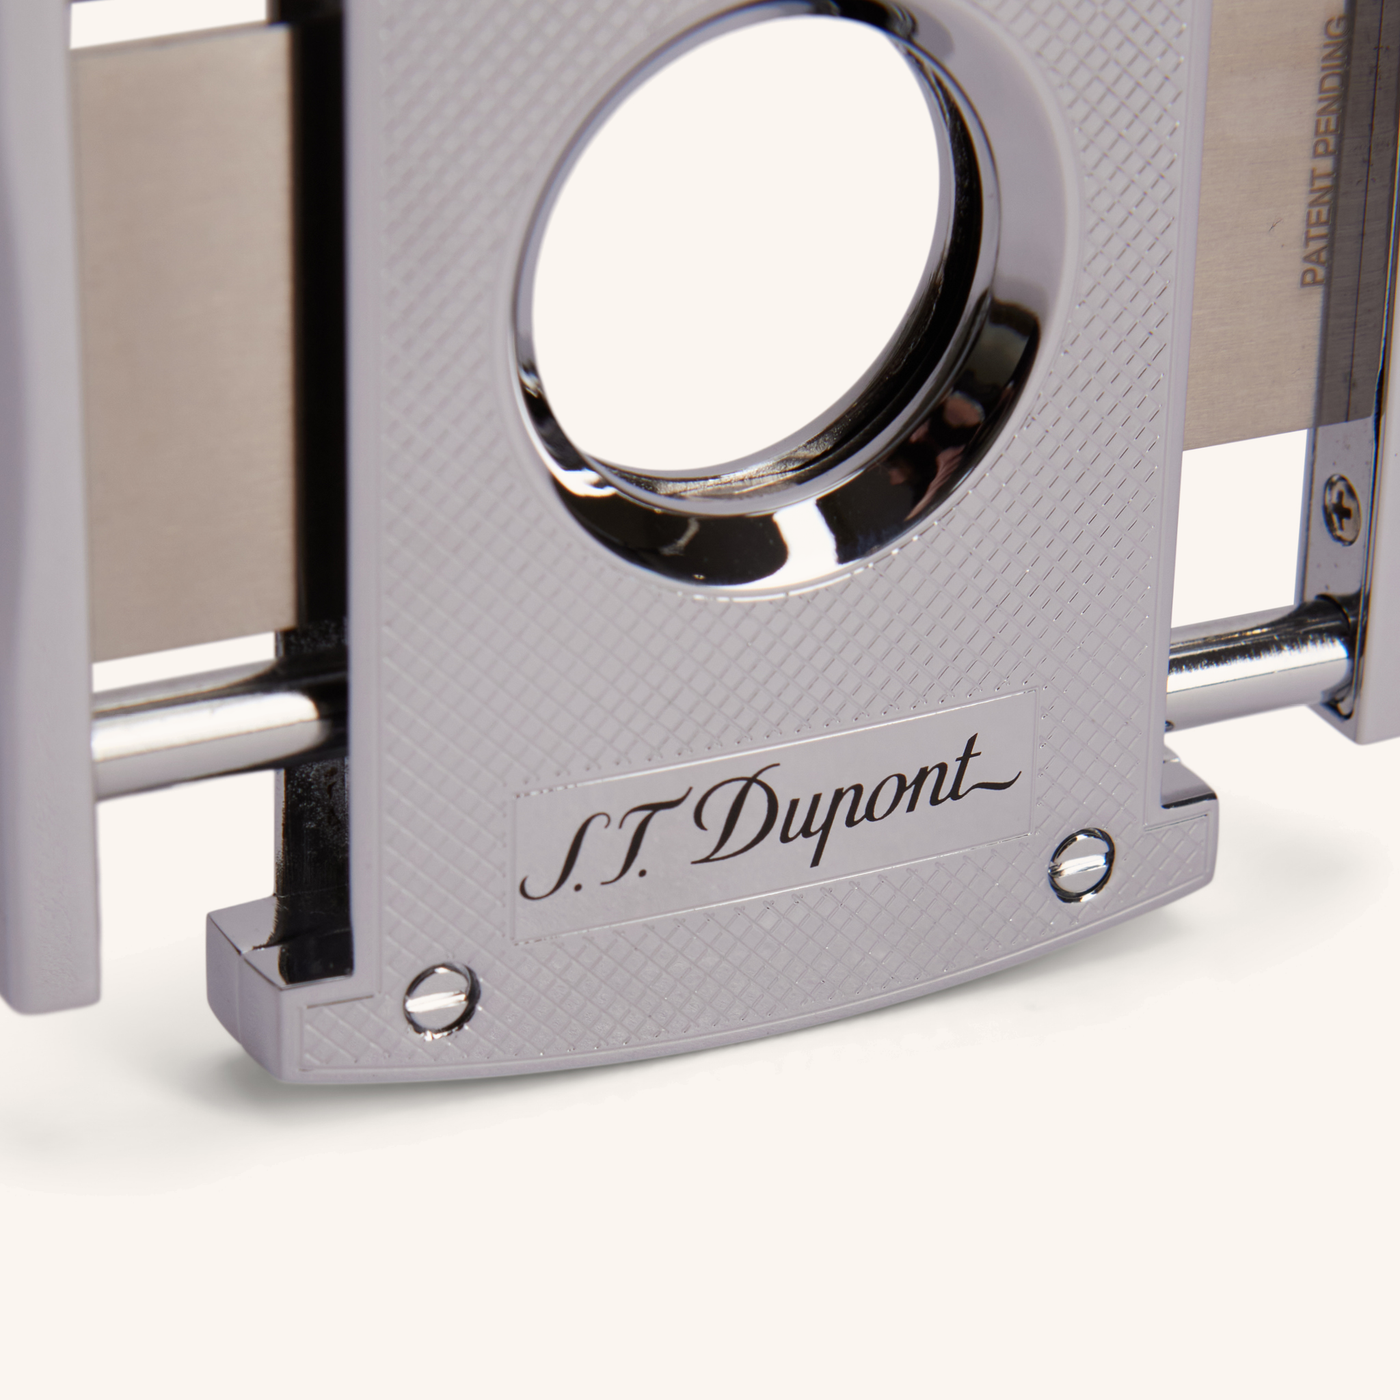 S.T. Dupont Maxijet Cigar Cutter Chequered Chrome